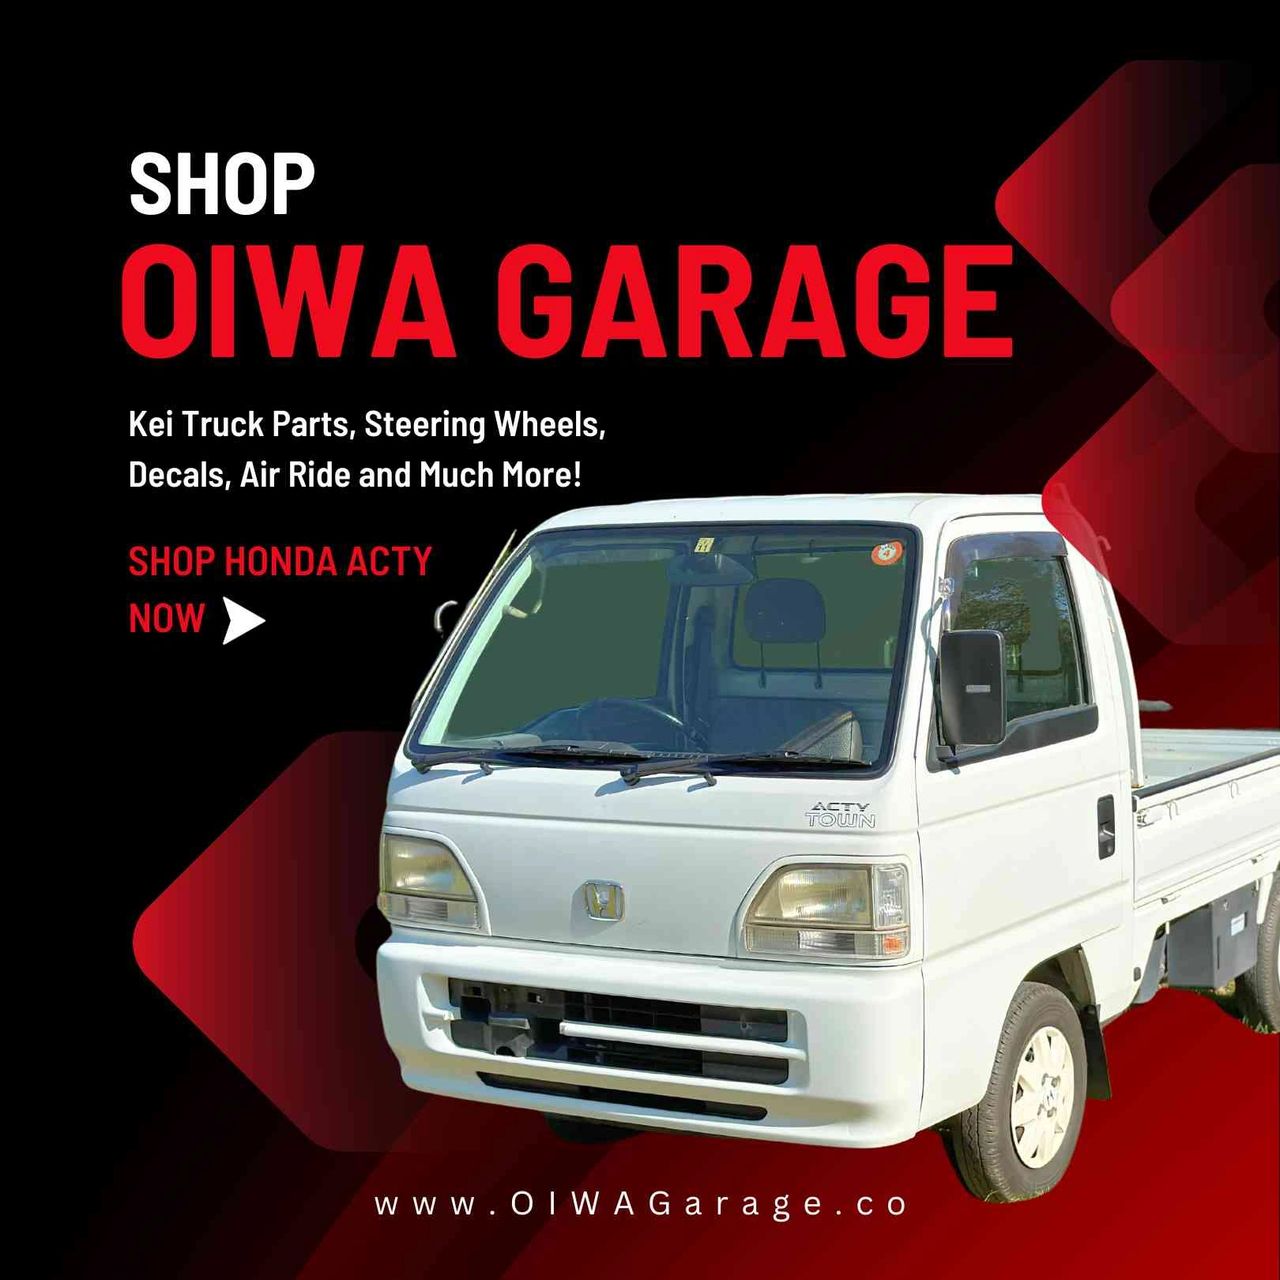 SHOP KEI TRUCK PARTS AND ACCESSORIES AT OIWAGARAGE.CO